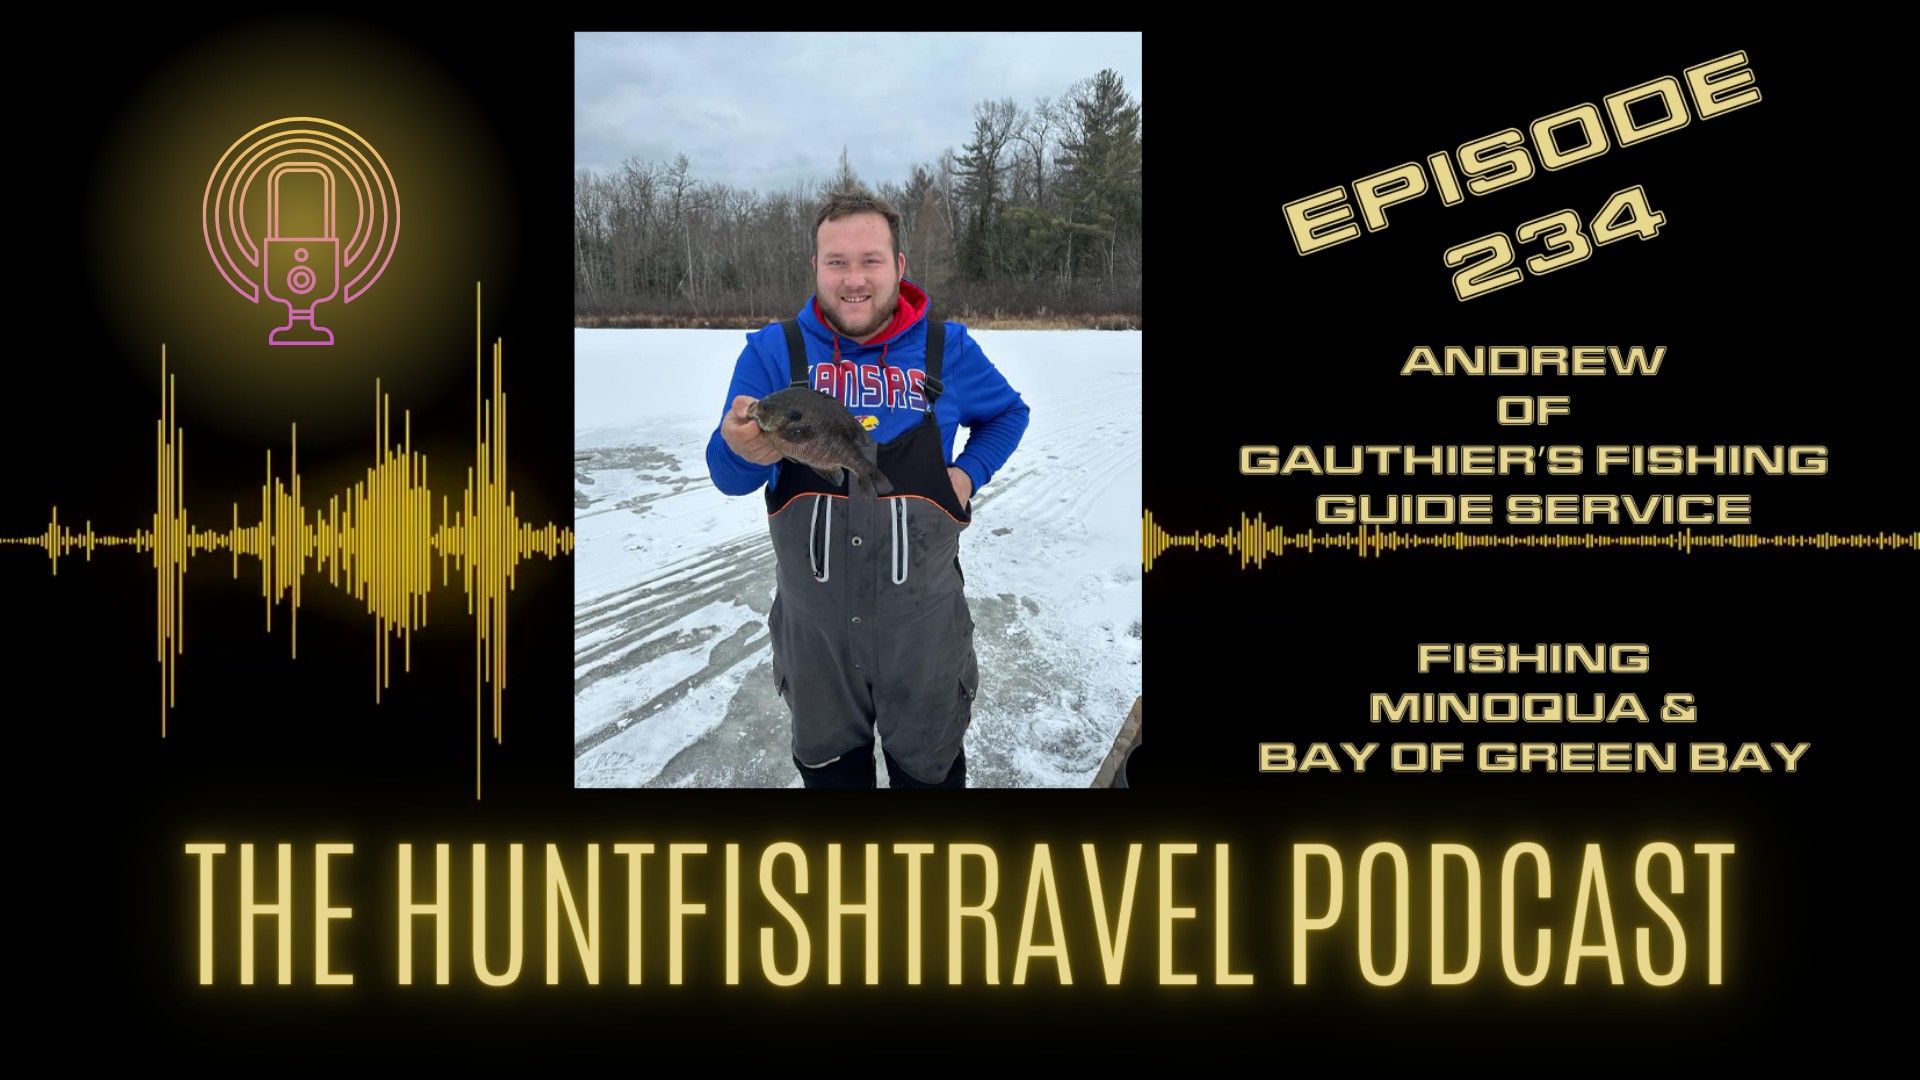 HuntFishTravel Podcast Ep234 - Fishing Minoqua & Bay of Green Bay with Gauthier’s Fishing Guide Service